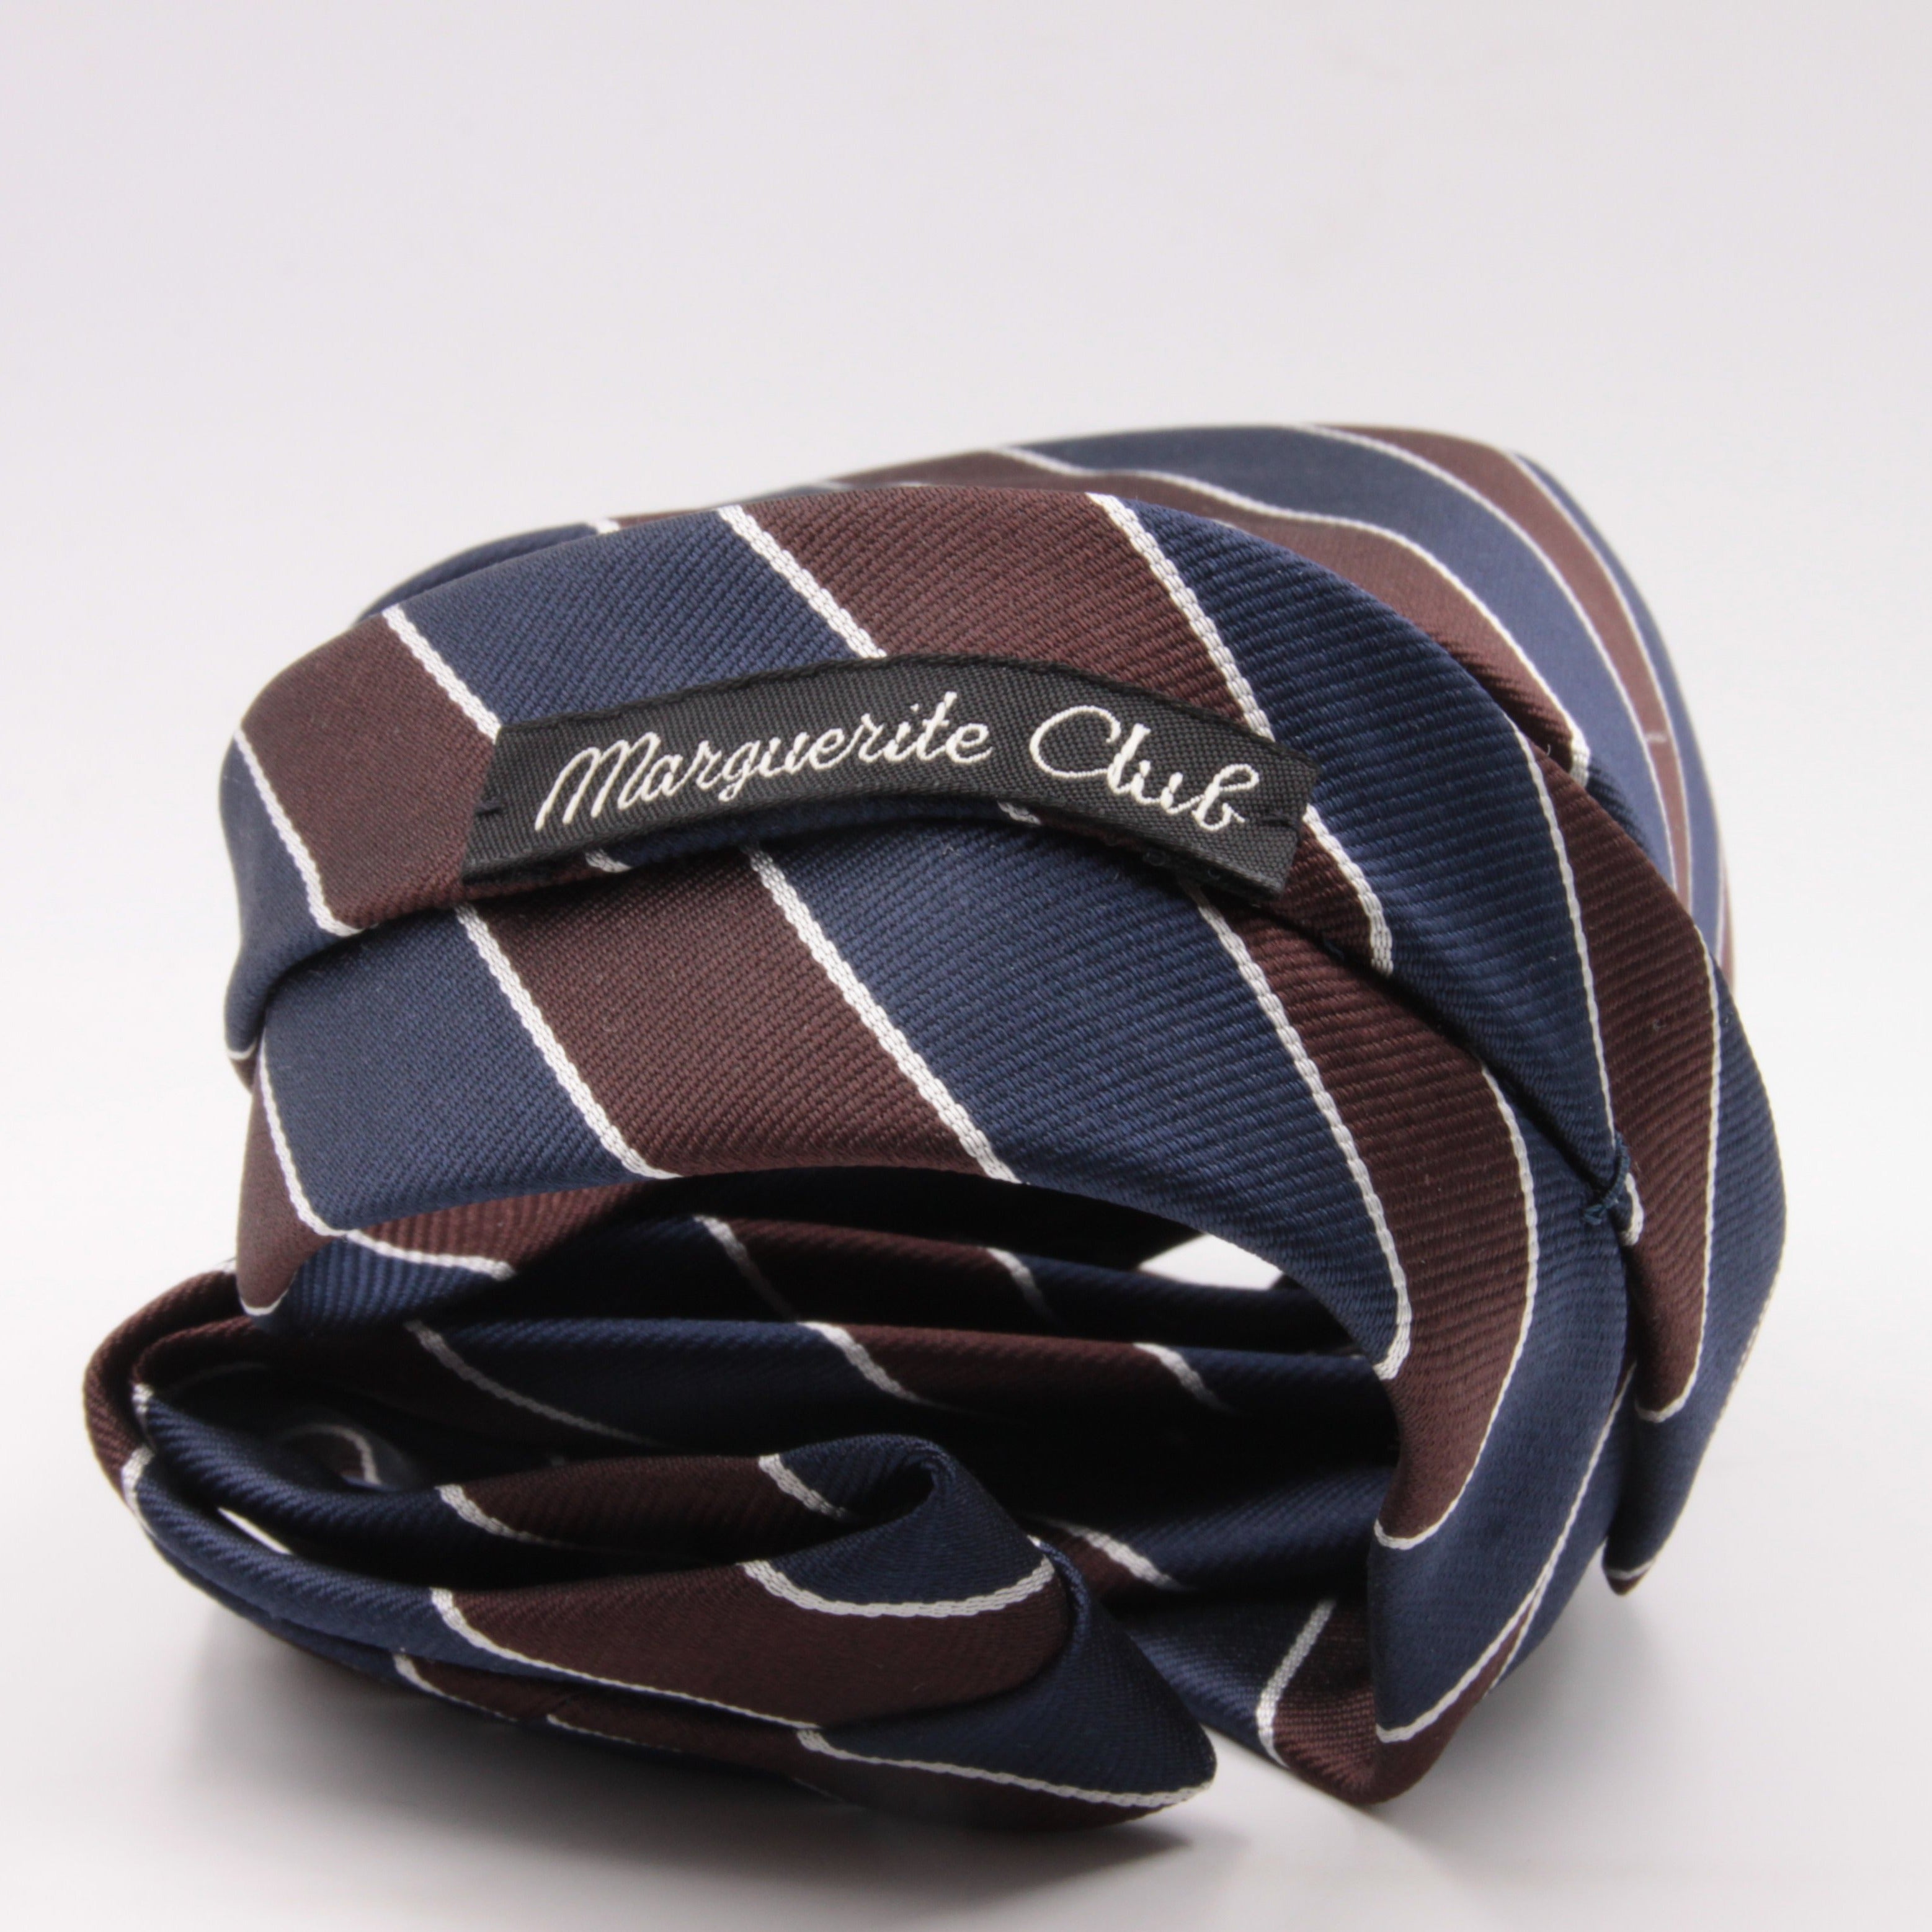 Holliday & Brown for Cruciani & Bella 100% Silk Jacquard  Regimental "Marguerite Club" Blue, Brown and White stripes tie Handmade in Italy 8 cm x 150 cm #5111